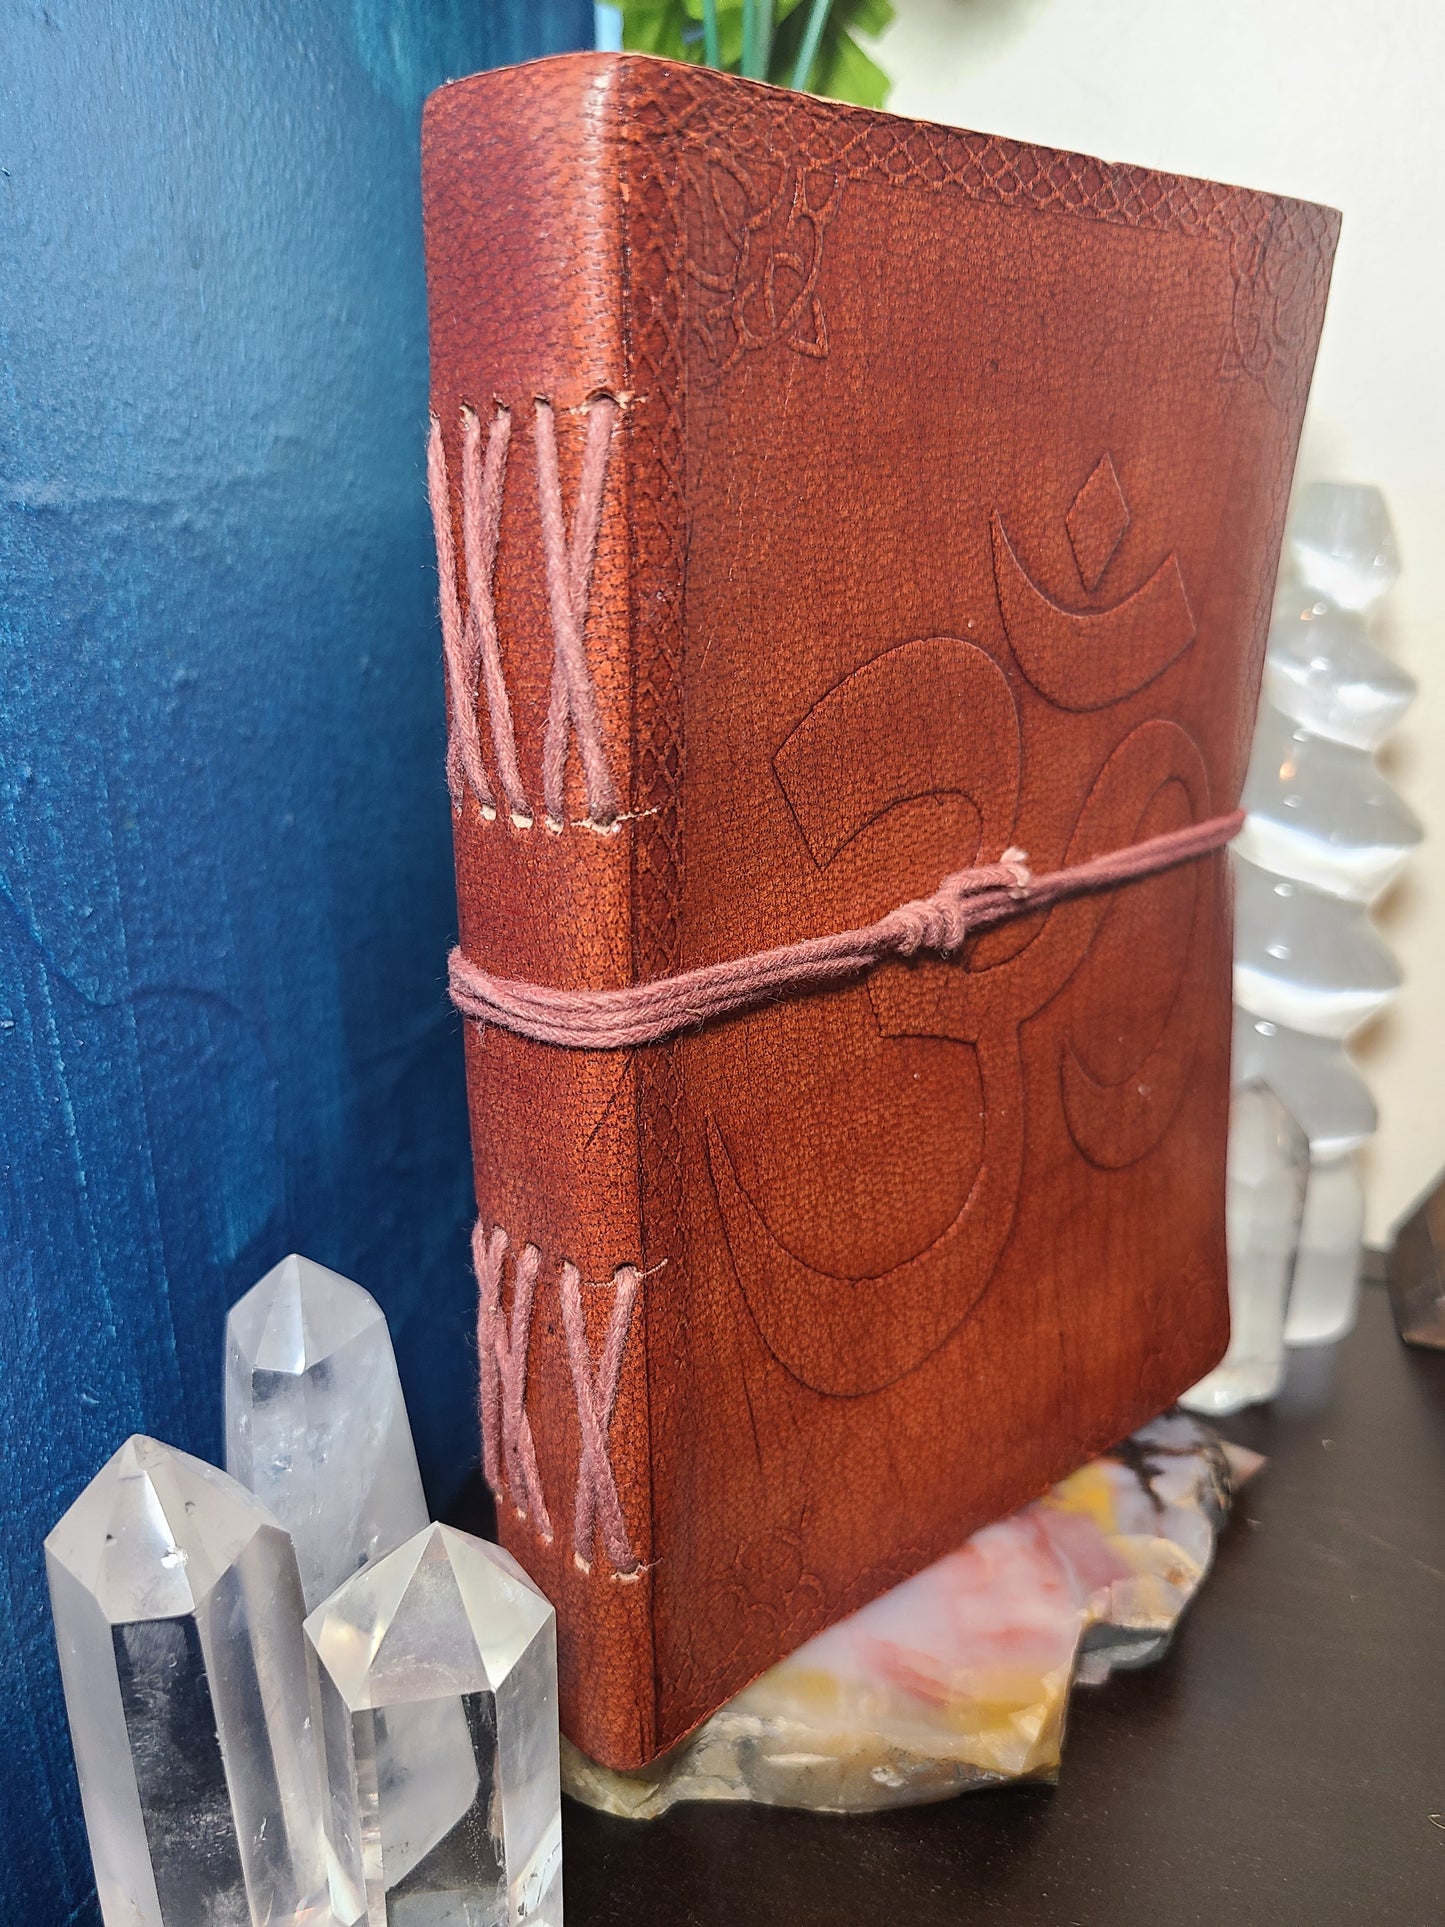 Om Leather Journal